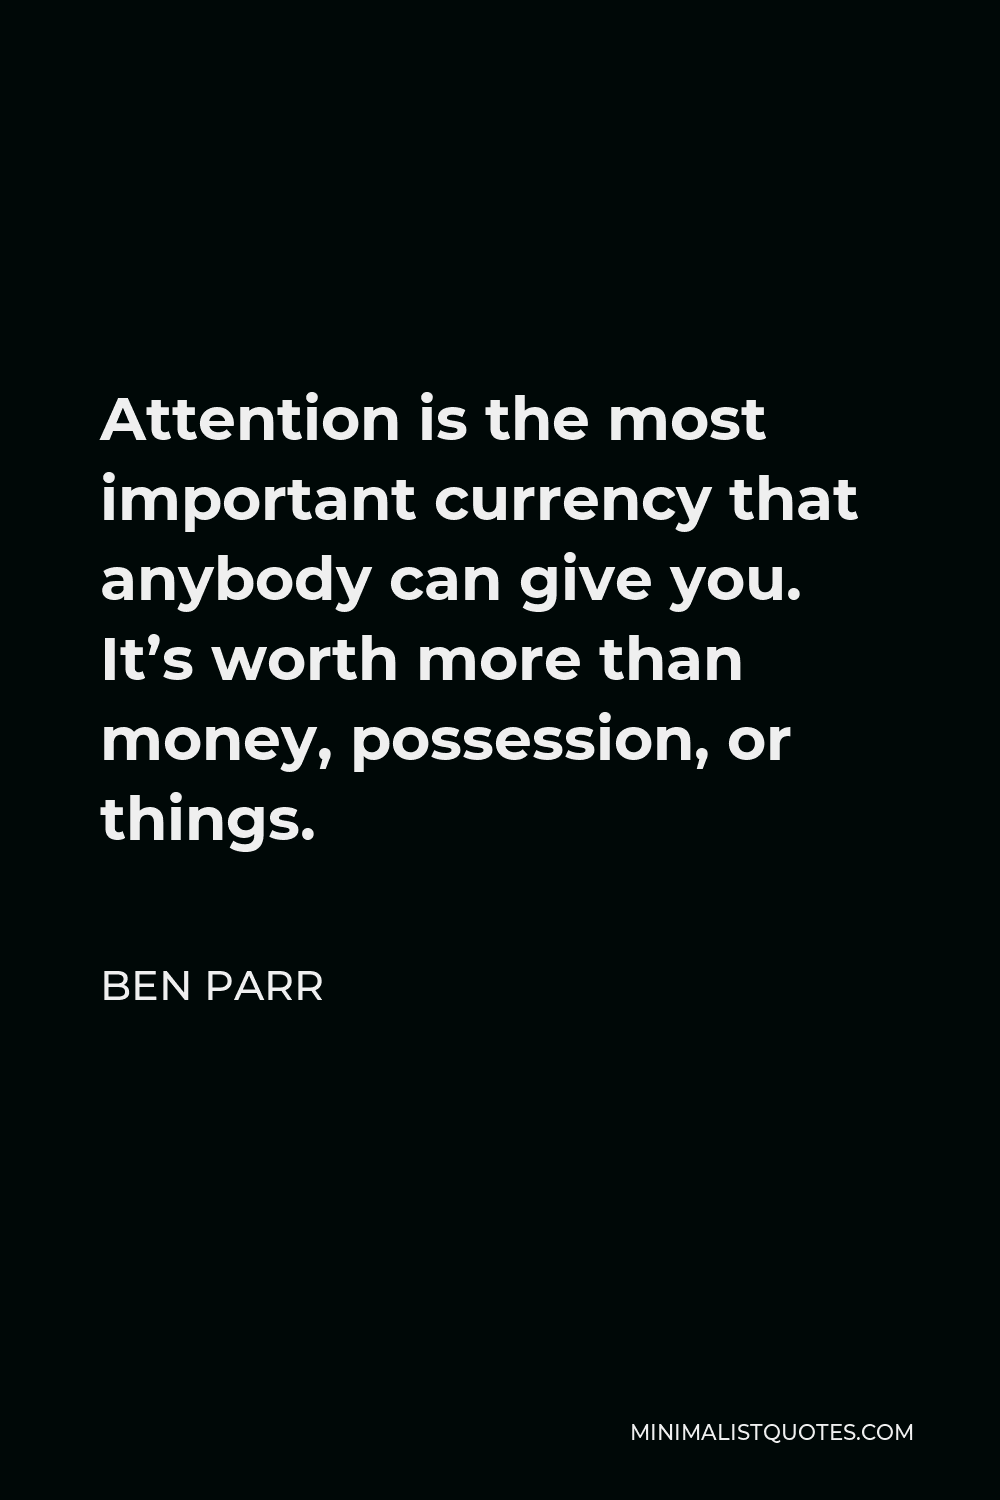 Ben Parr Quote - Attention is the most important currency that anybody can give you. It’s worth more than money, possession, or things.